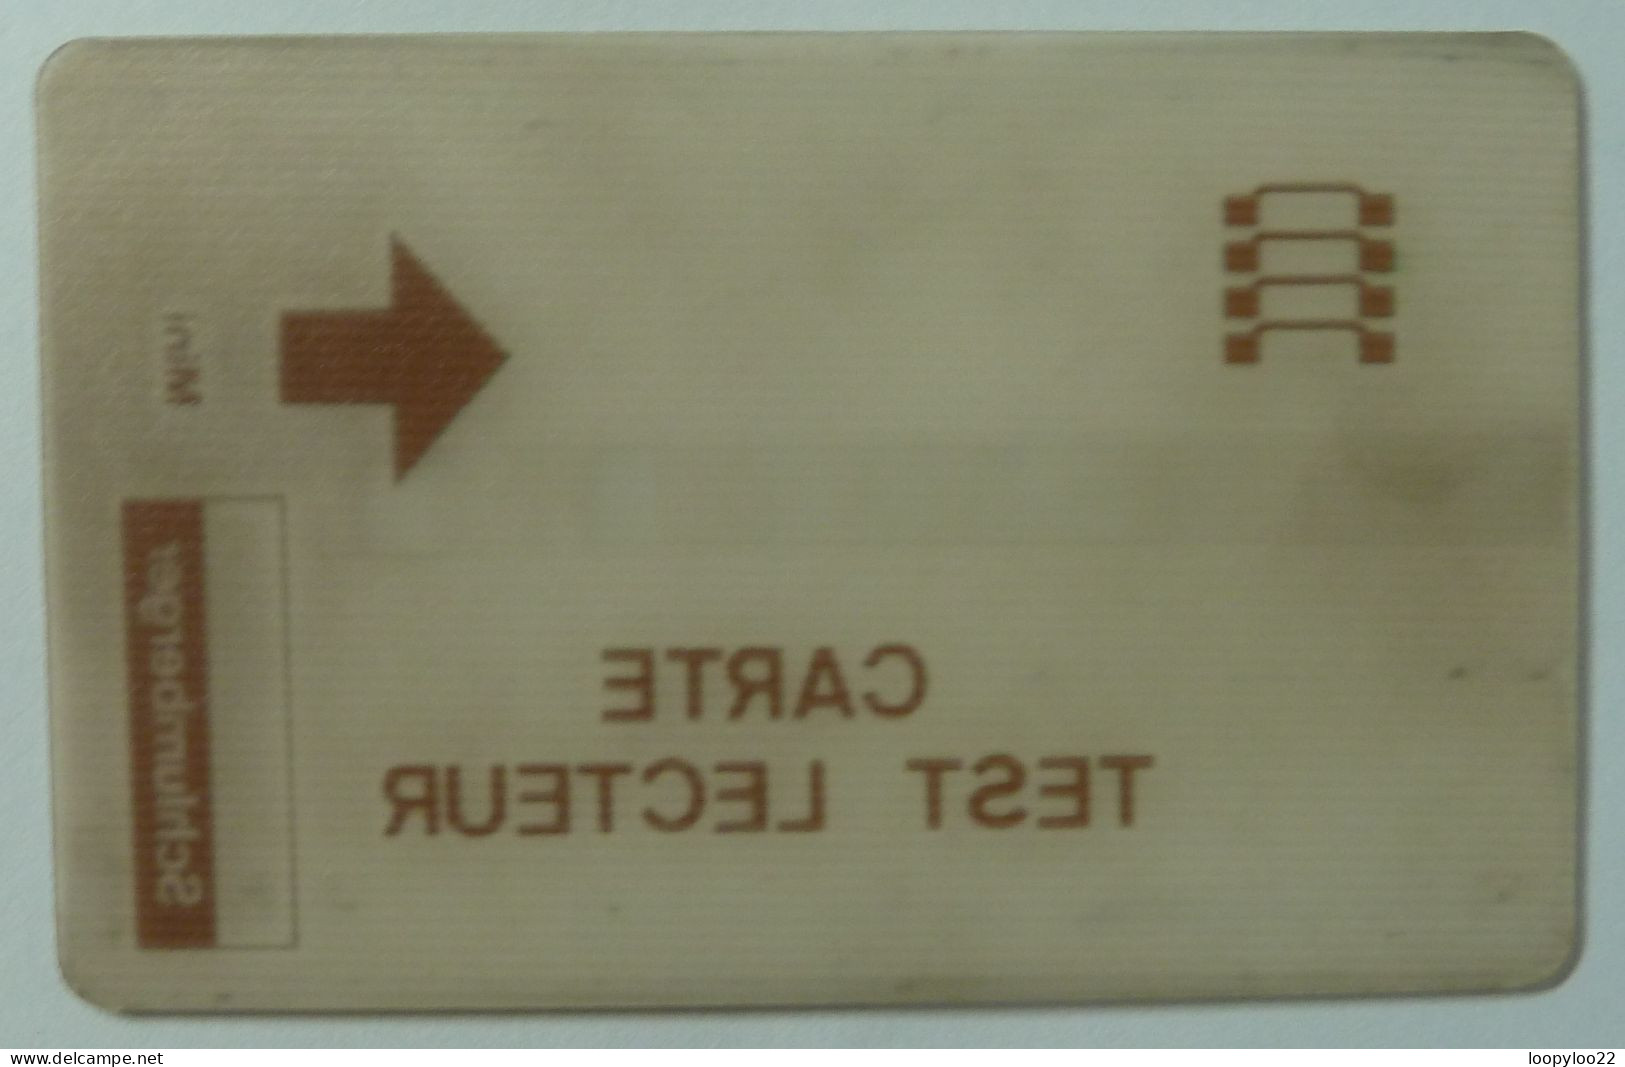 FRANCE - Test For Schlumberger - CARTE TEST LECTEUR - Used For Circuit Testing - R - Ohne Zuordnung